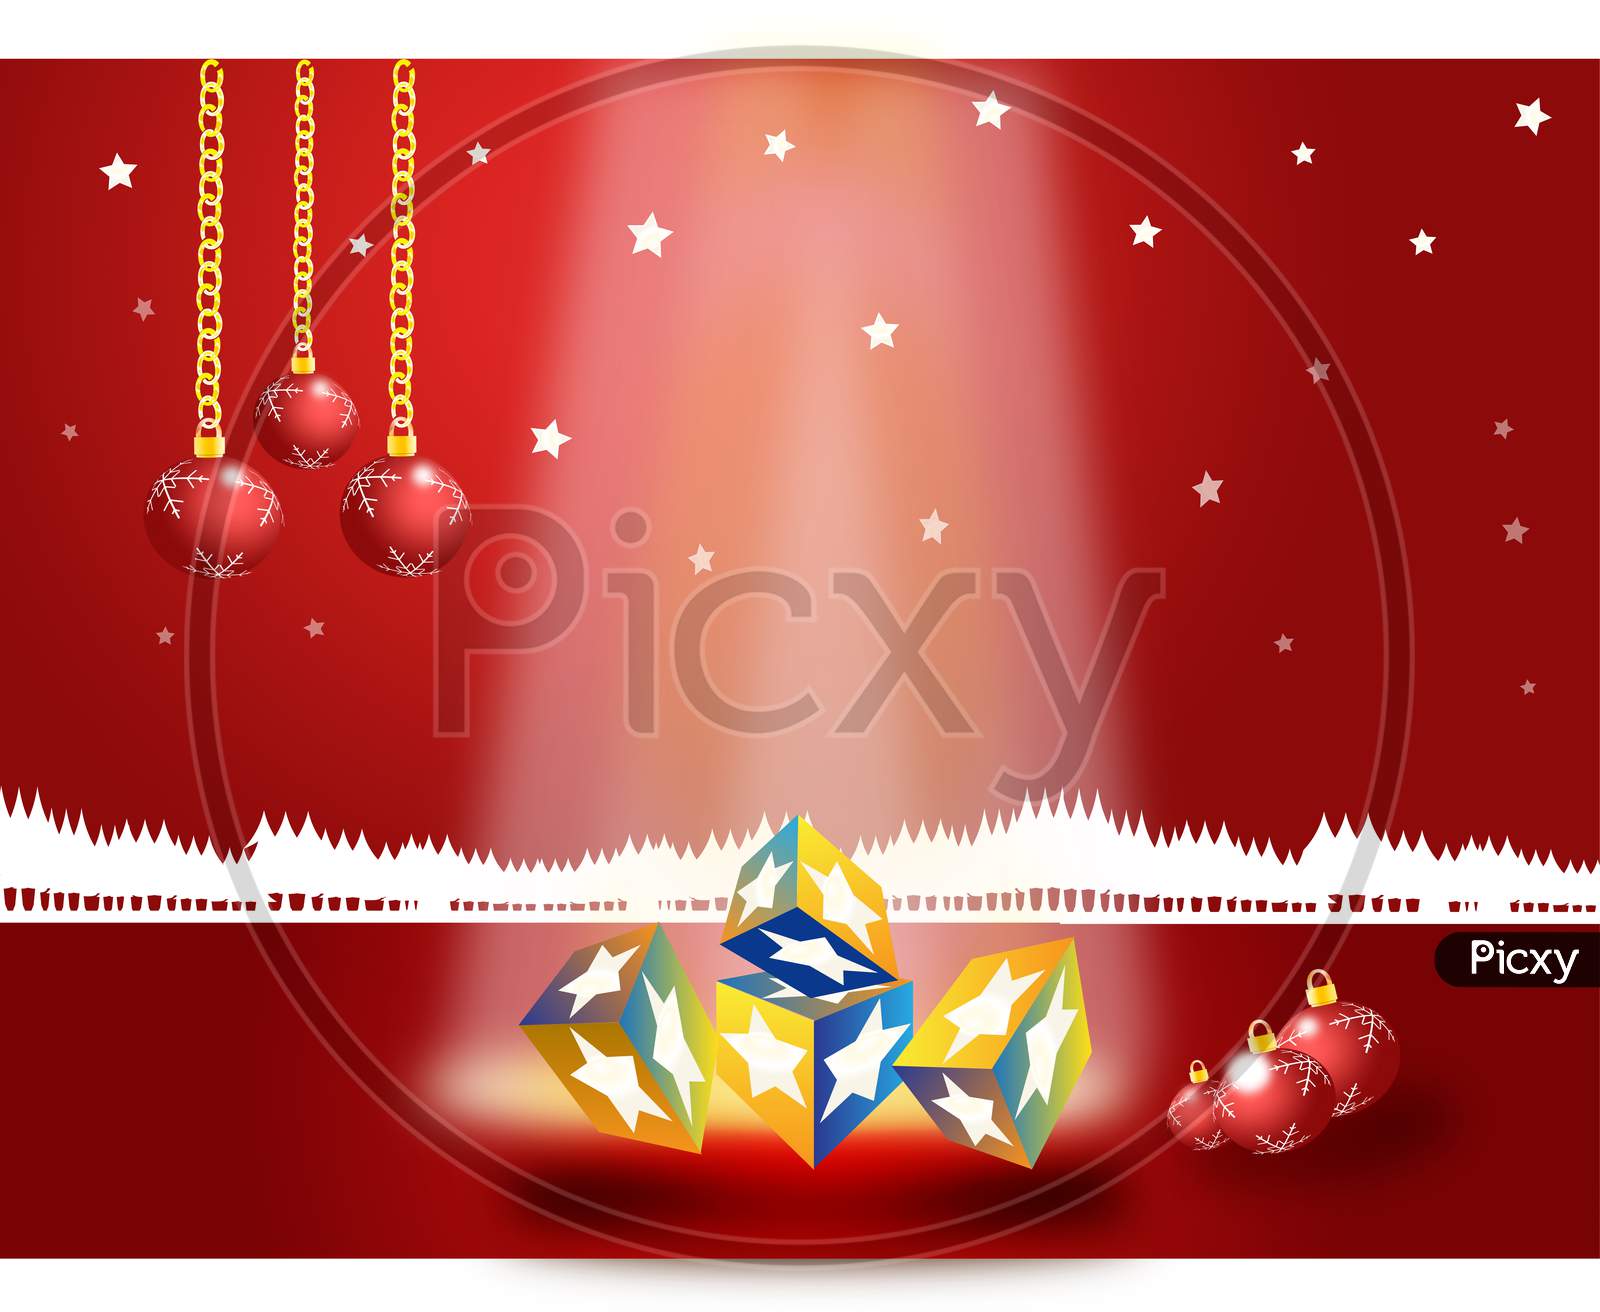 Christmas background with tree and ornaments with the ray of light coming from the heaven to give gifts.